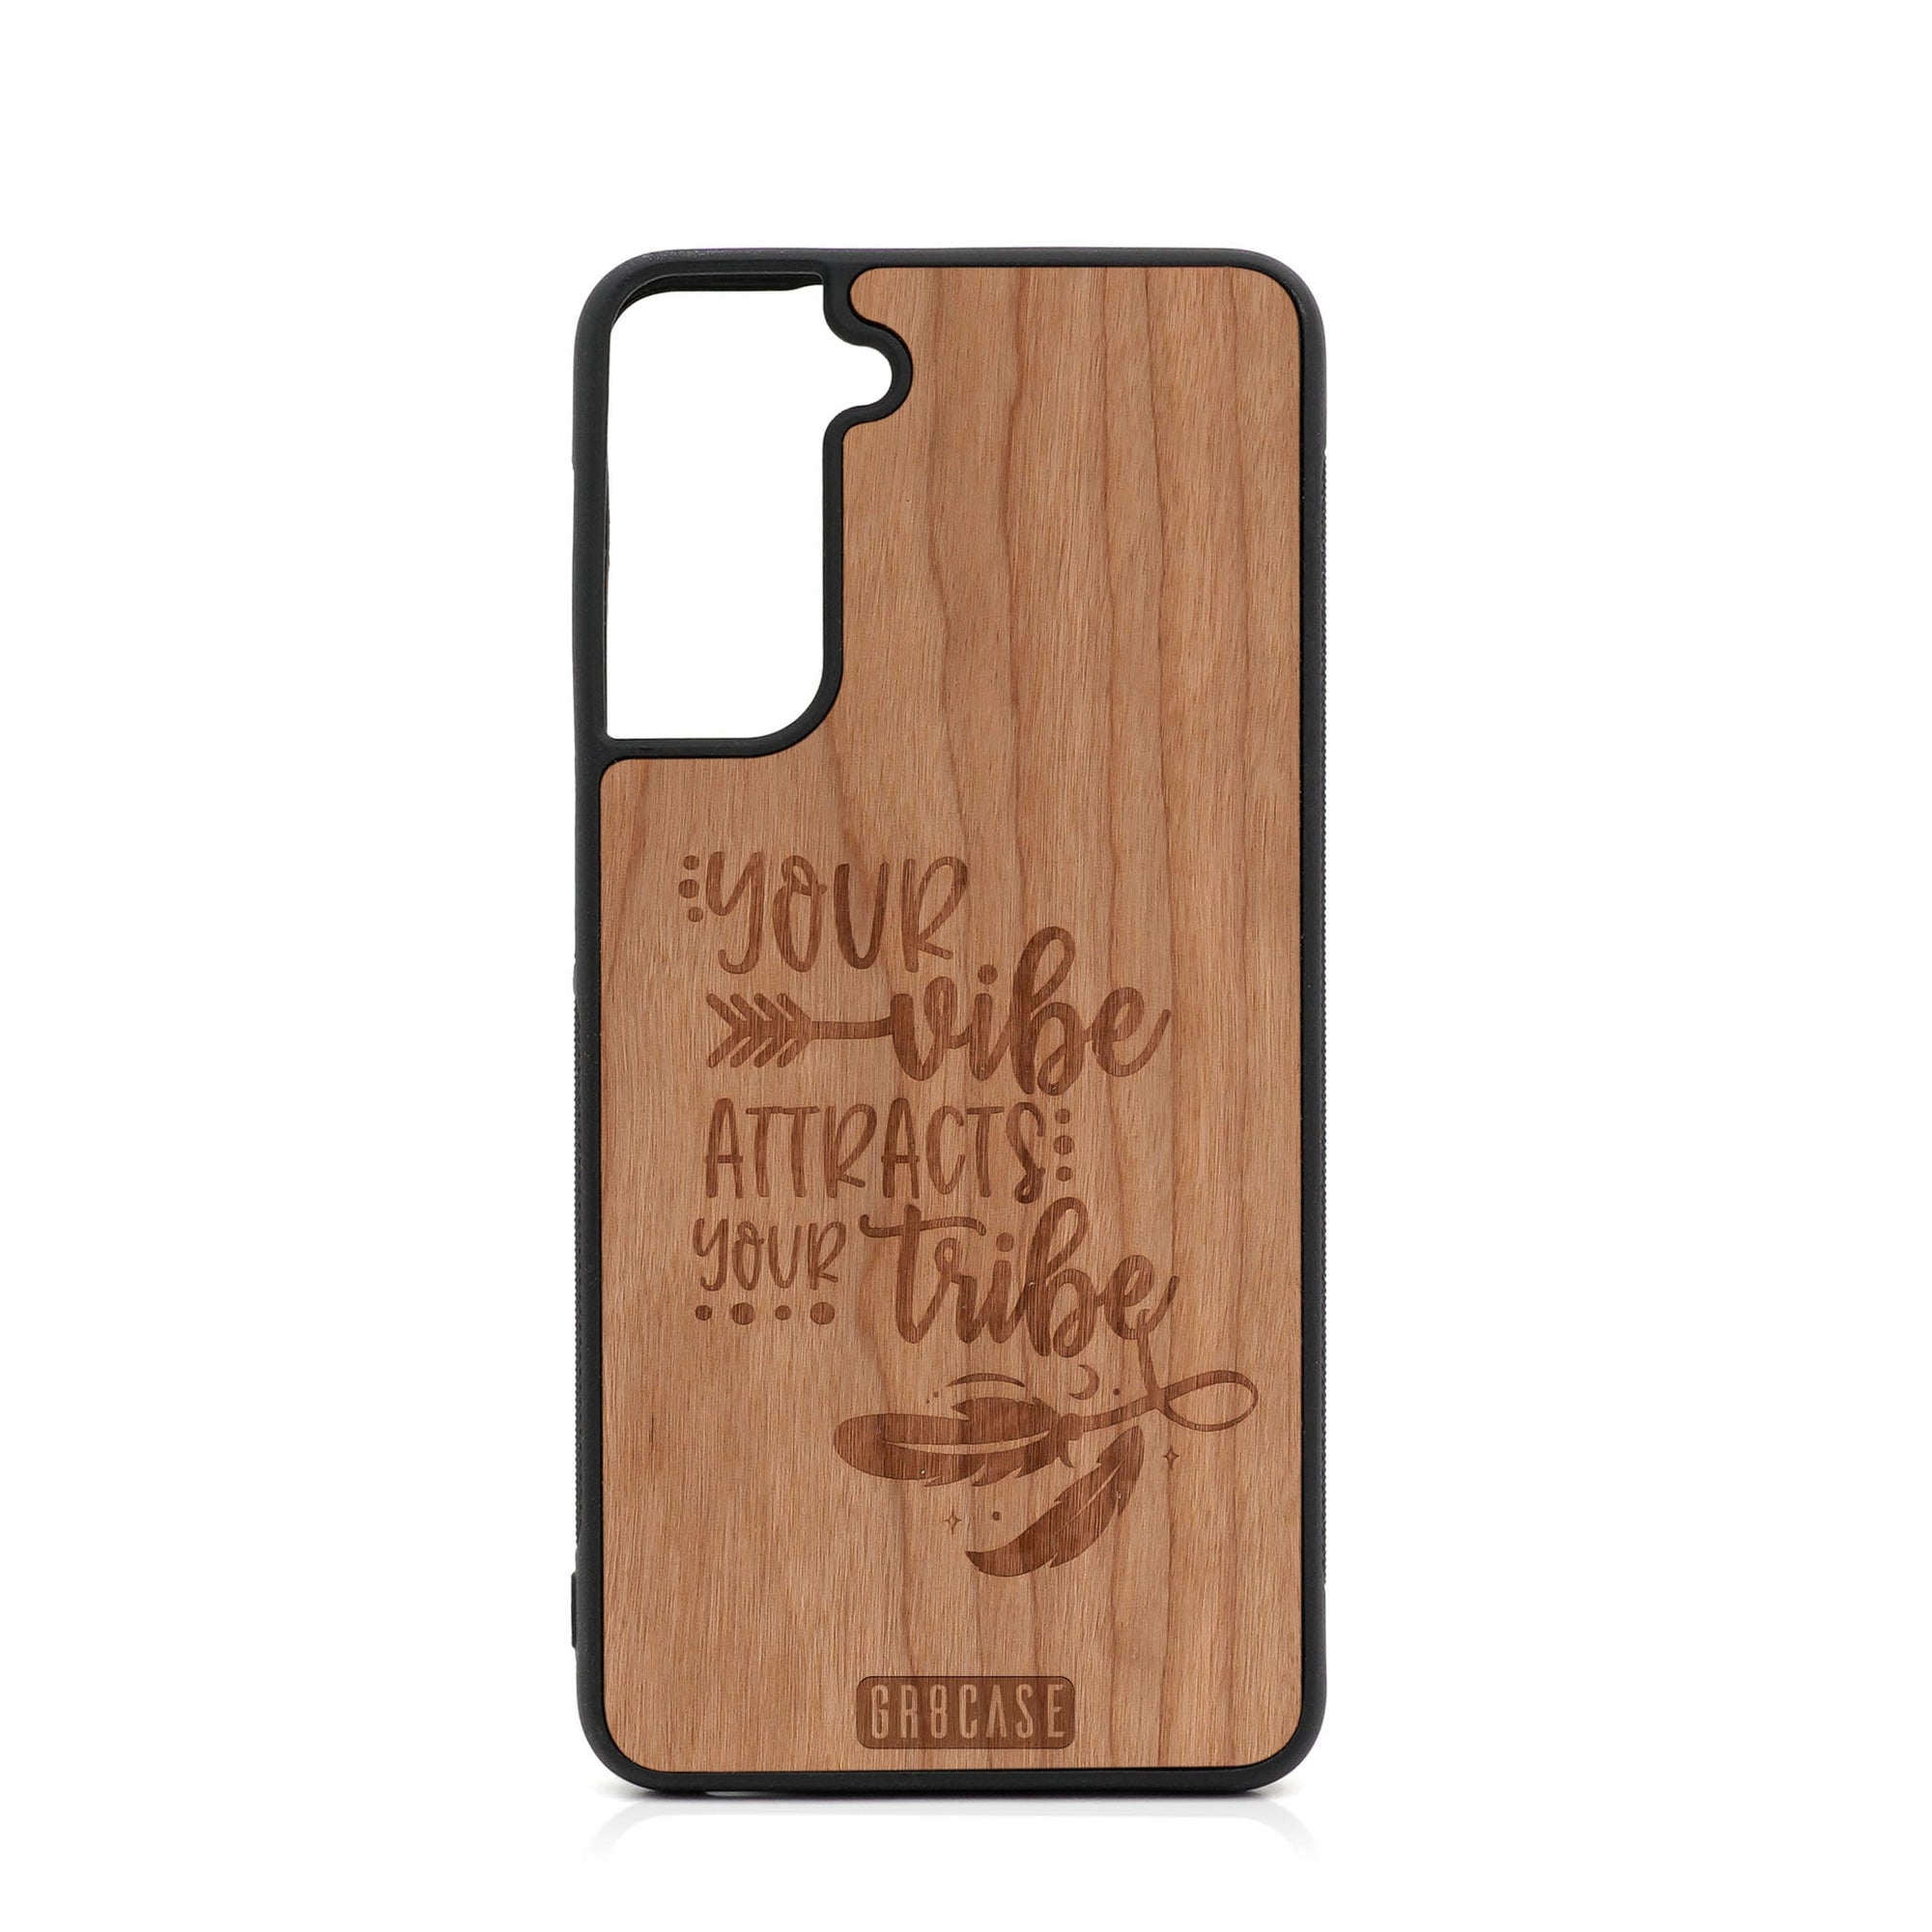 Your Vibe Attracts Your Tribe Design Wood Case For Samsung Galaxy S21 FE 5G